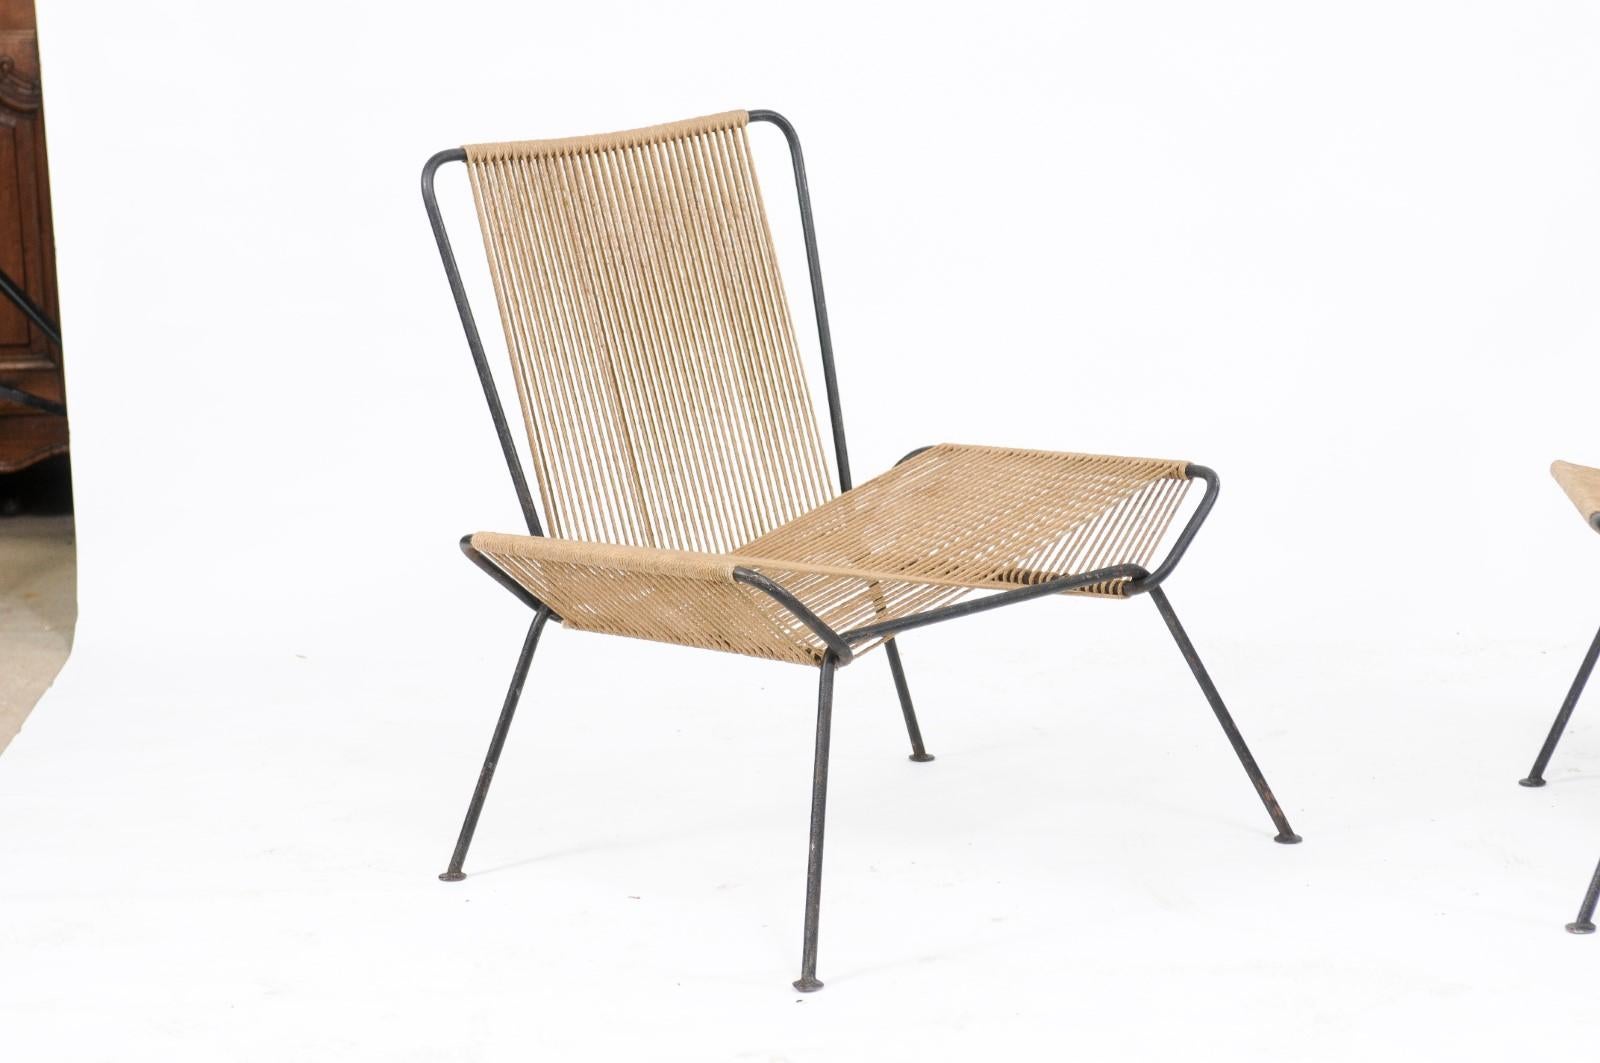 A pair of vintage midcentury iron and hemp string chairs in the style of Allan Gould from the 1950s. This is a very rare and hard-to-find pair of iron and hemp string chairs, from the 1950s, in the style of Allan Gould (and possibly designed by him